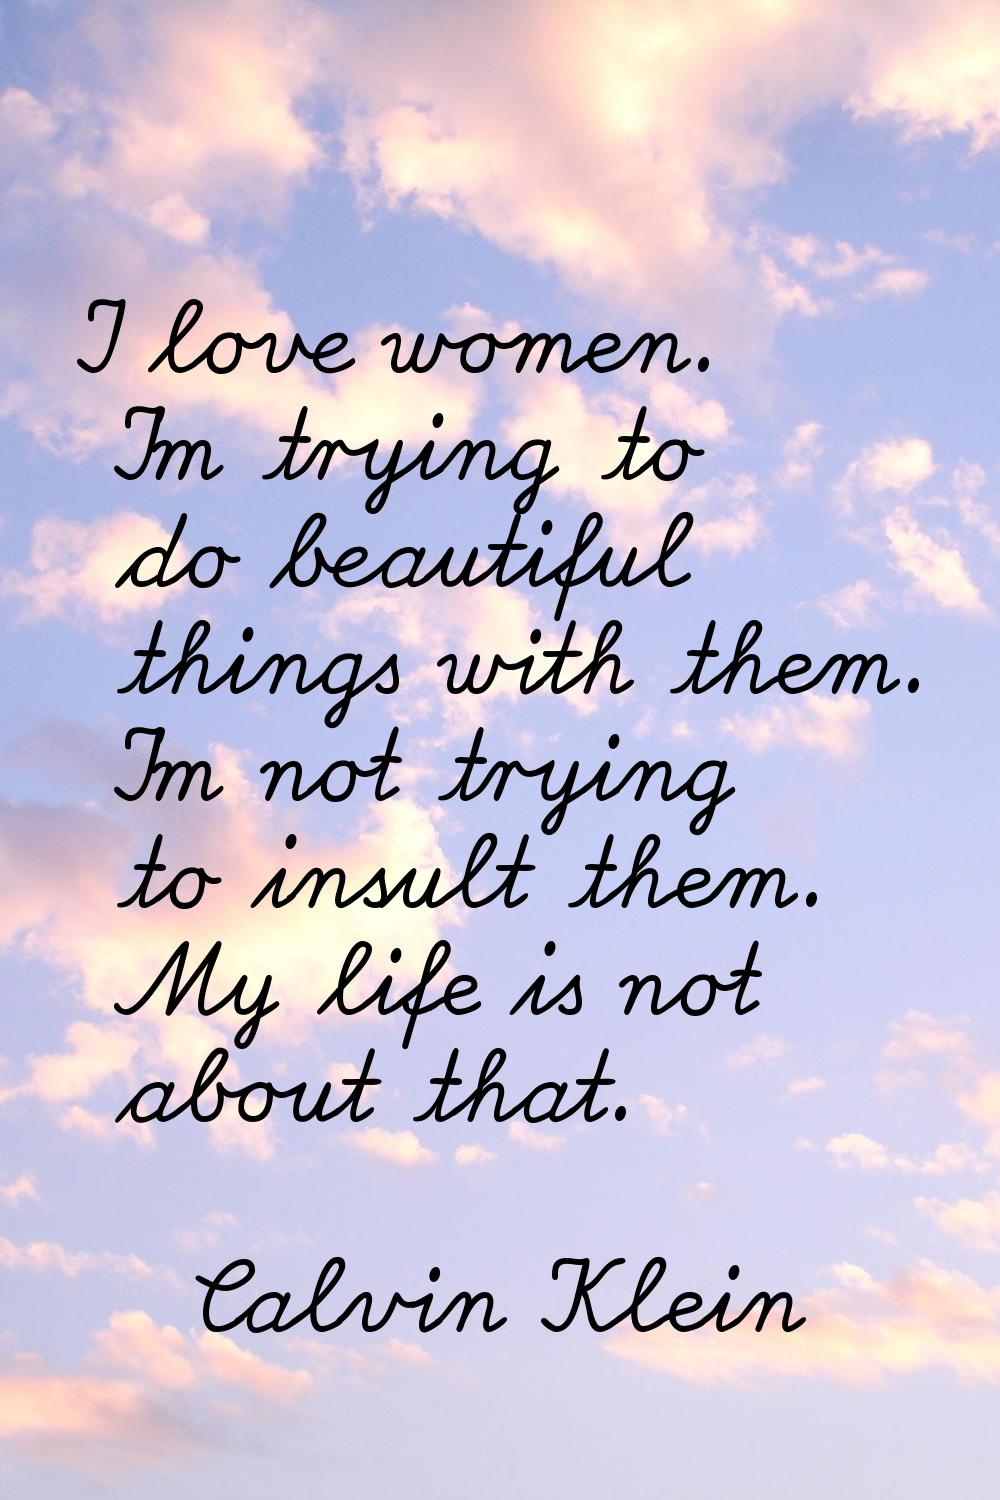 I love women. I'm trying to do beautiful things with them. I'm not trying to insult them. My life i